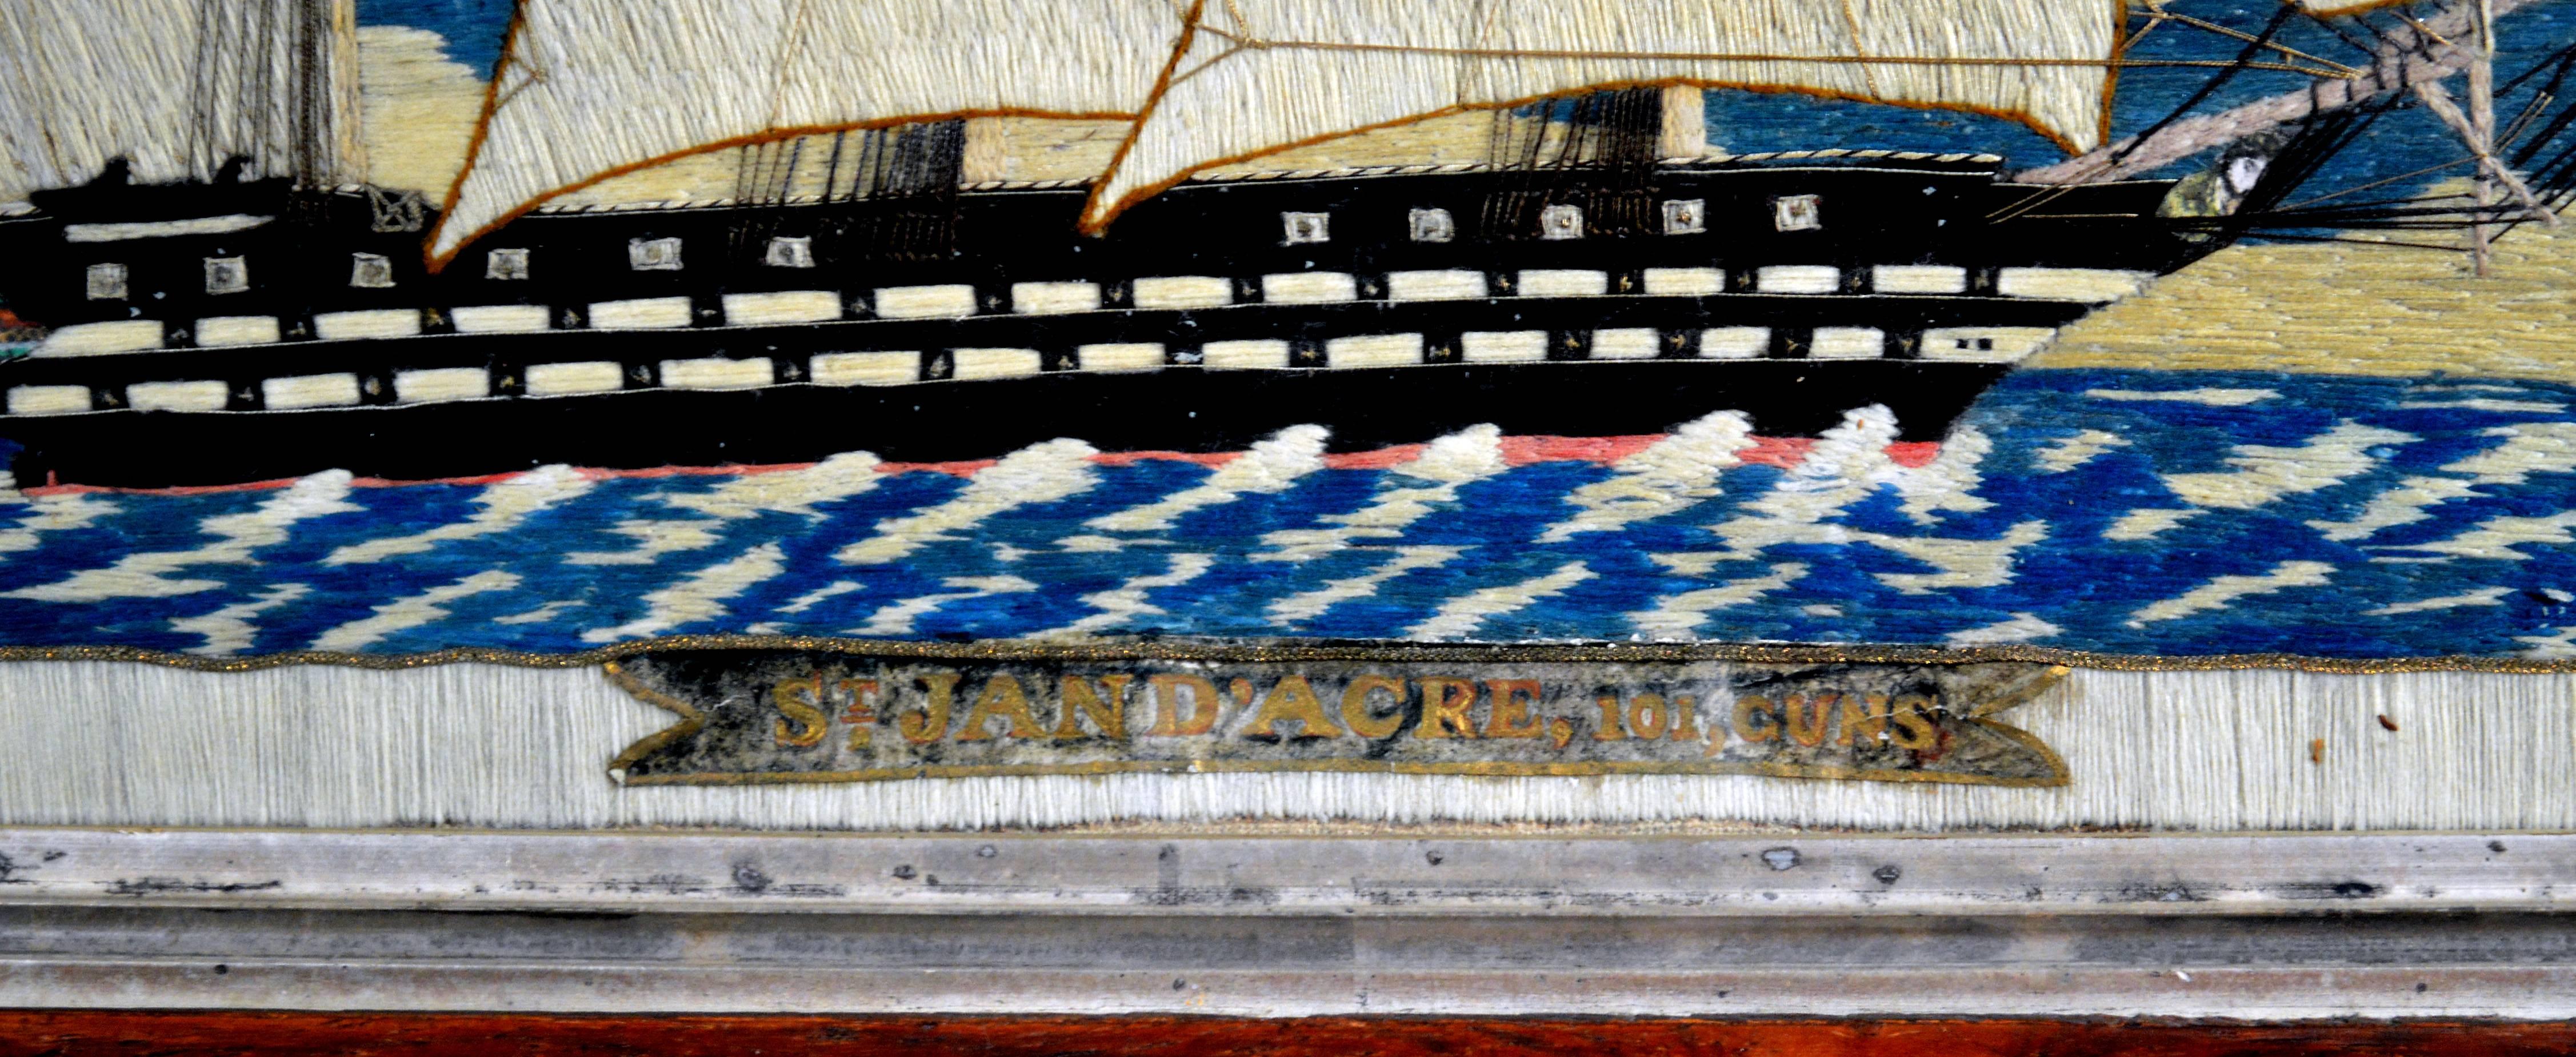 English Sailor's Large Woolie Picture of the Named St. Jean D' Arcre, 
101 Guns, 
circa 1860-1870.

The sailor's woolwork depicts a starboard view of the St. Jean D'Arcre under full sail on a stylized choppy sea with bands of blue sky